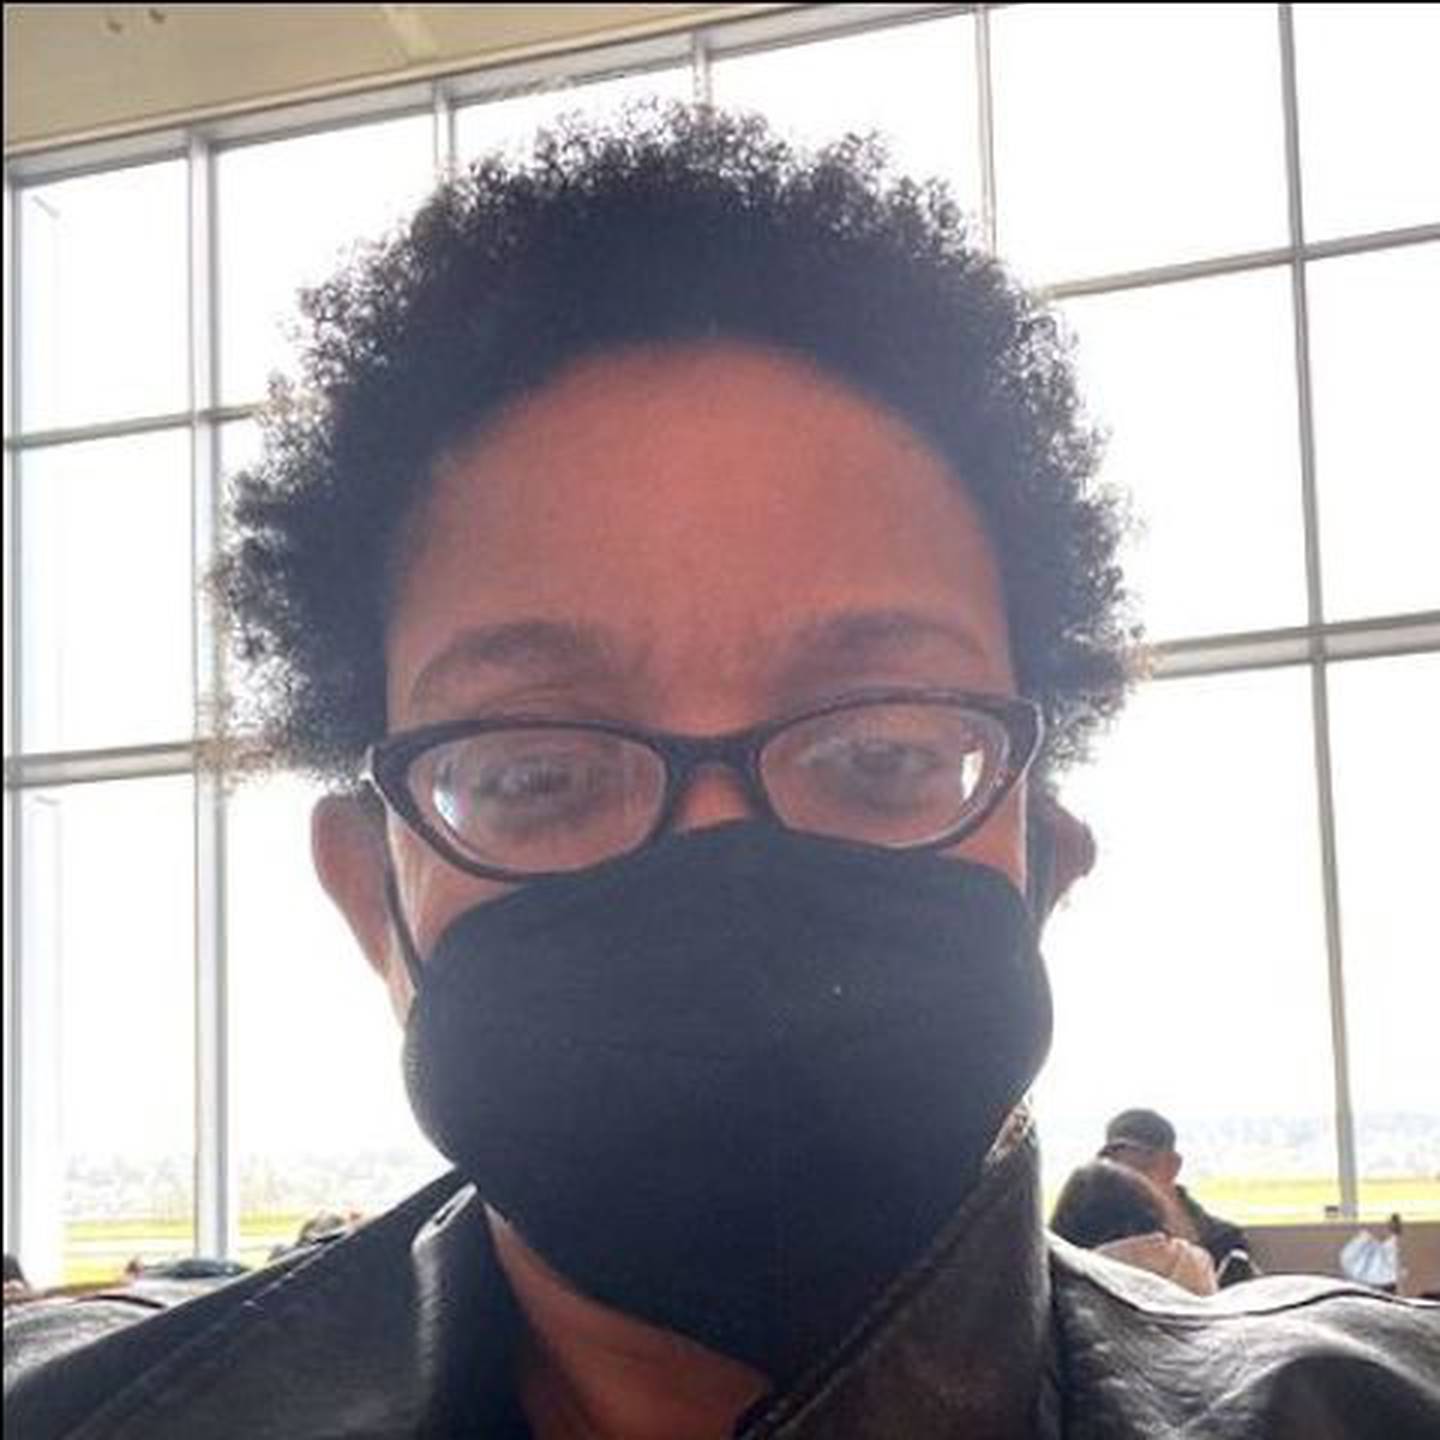 Leslie Gray Streeter wearing a face mask while traveling.